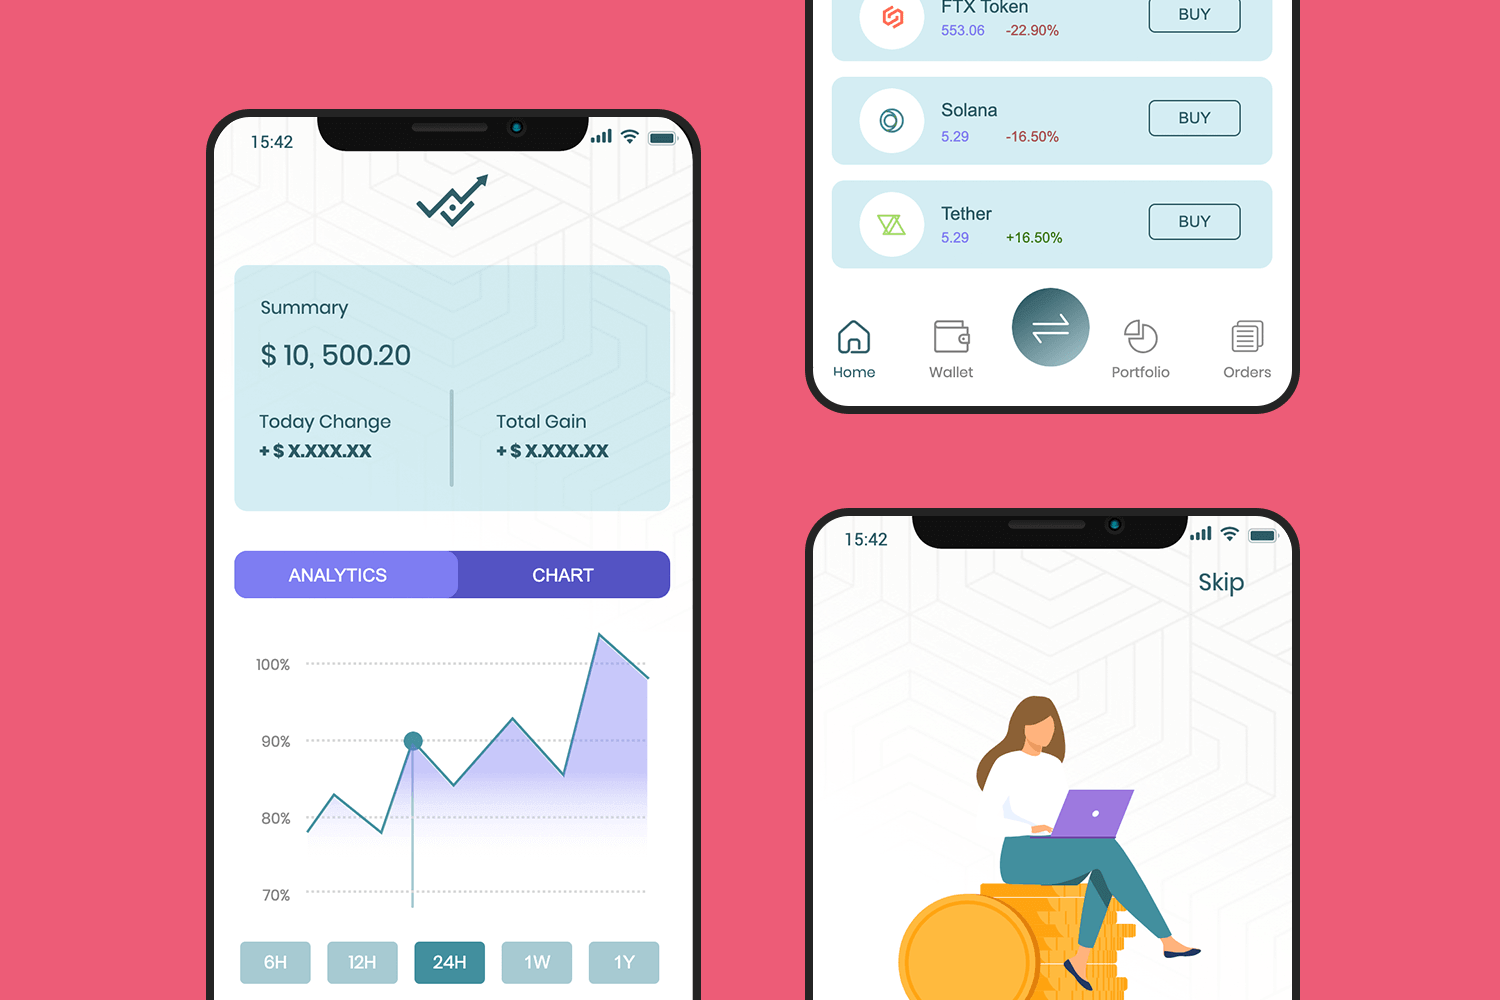 Investment app showing portfolio summary, cryptocurrency prices, and trading options